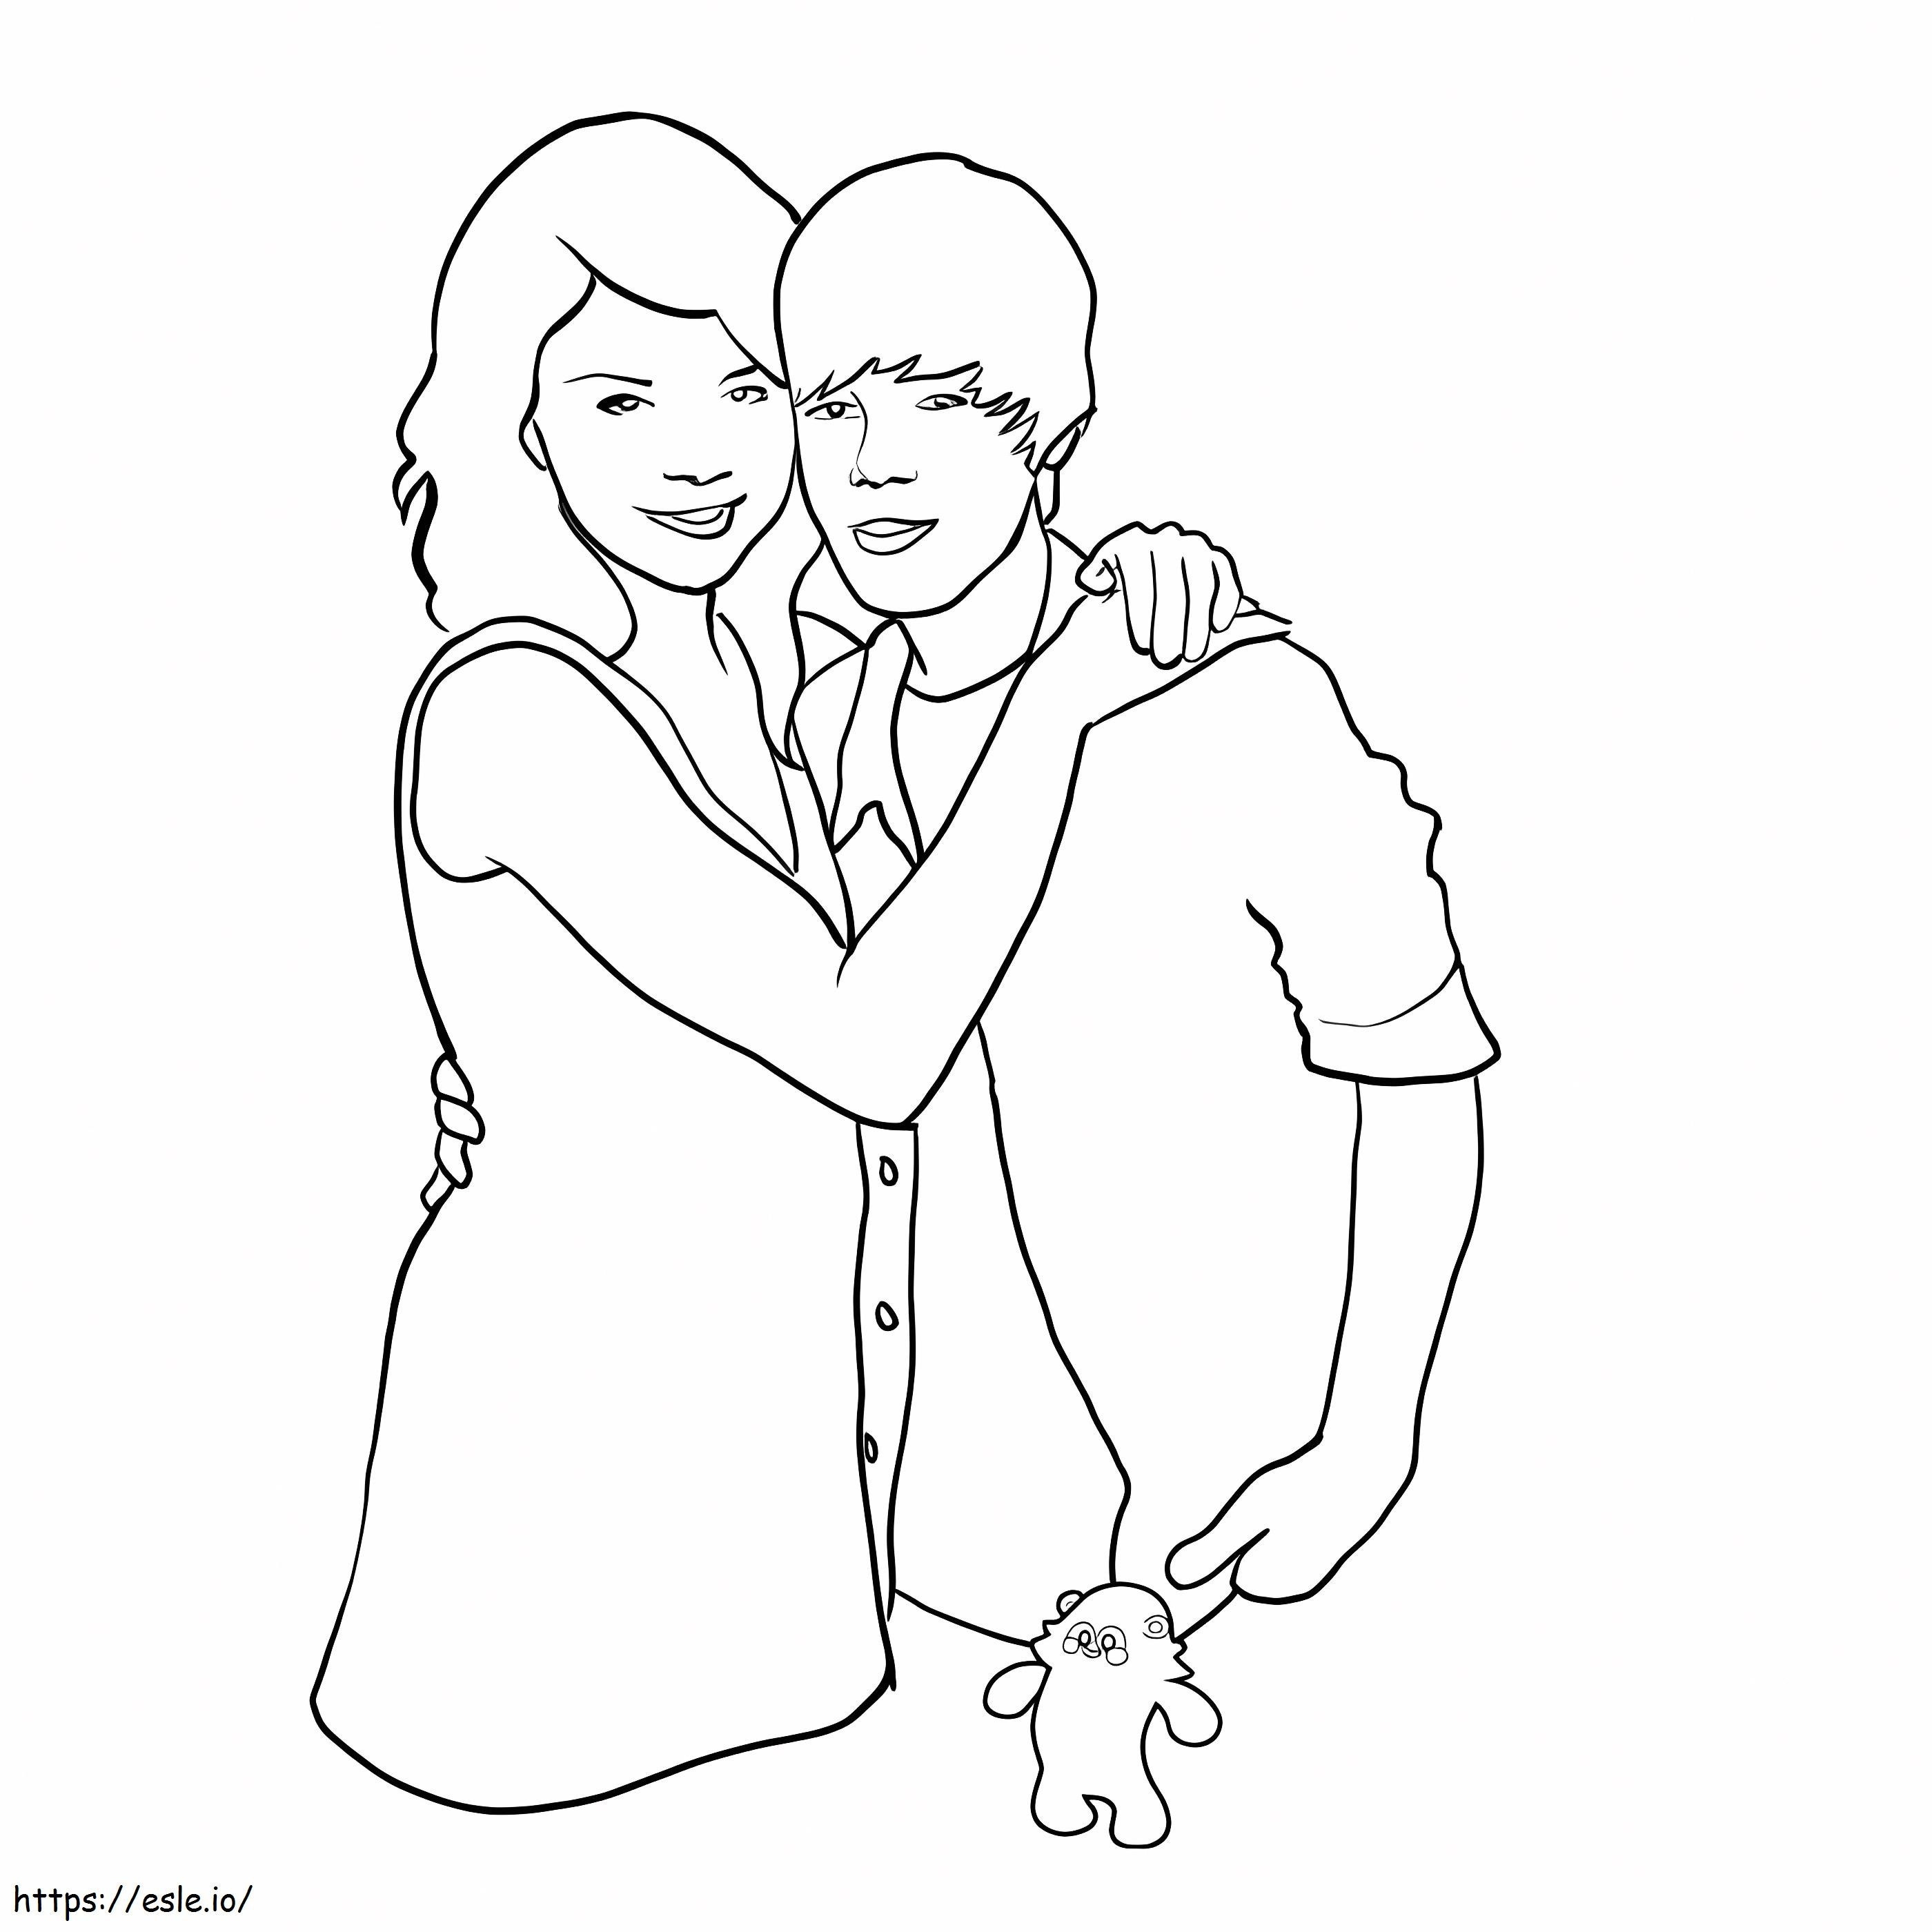 Couple Justin Bieber And Girlfriend coloring page